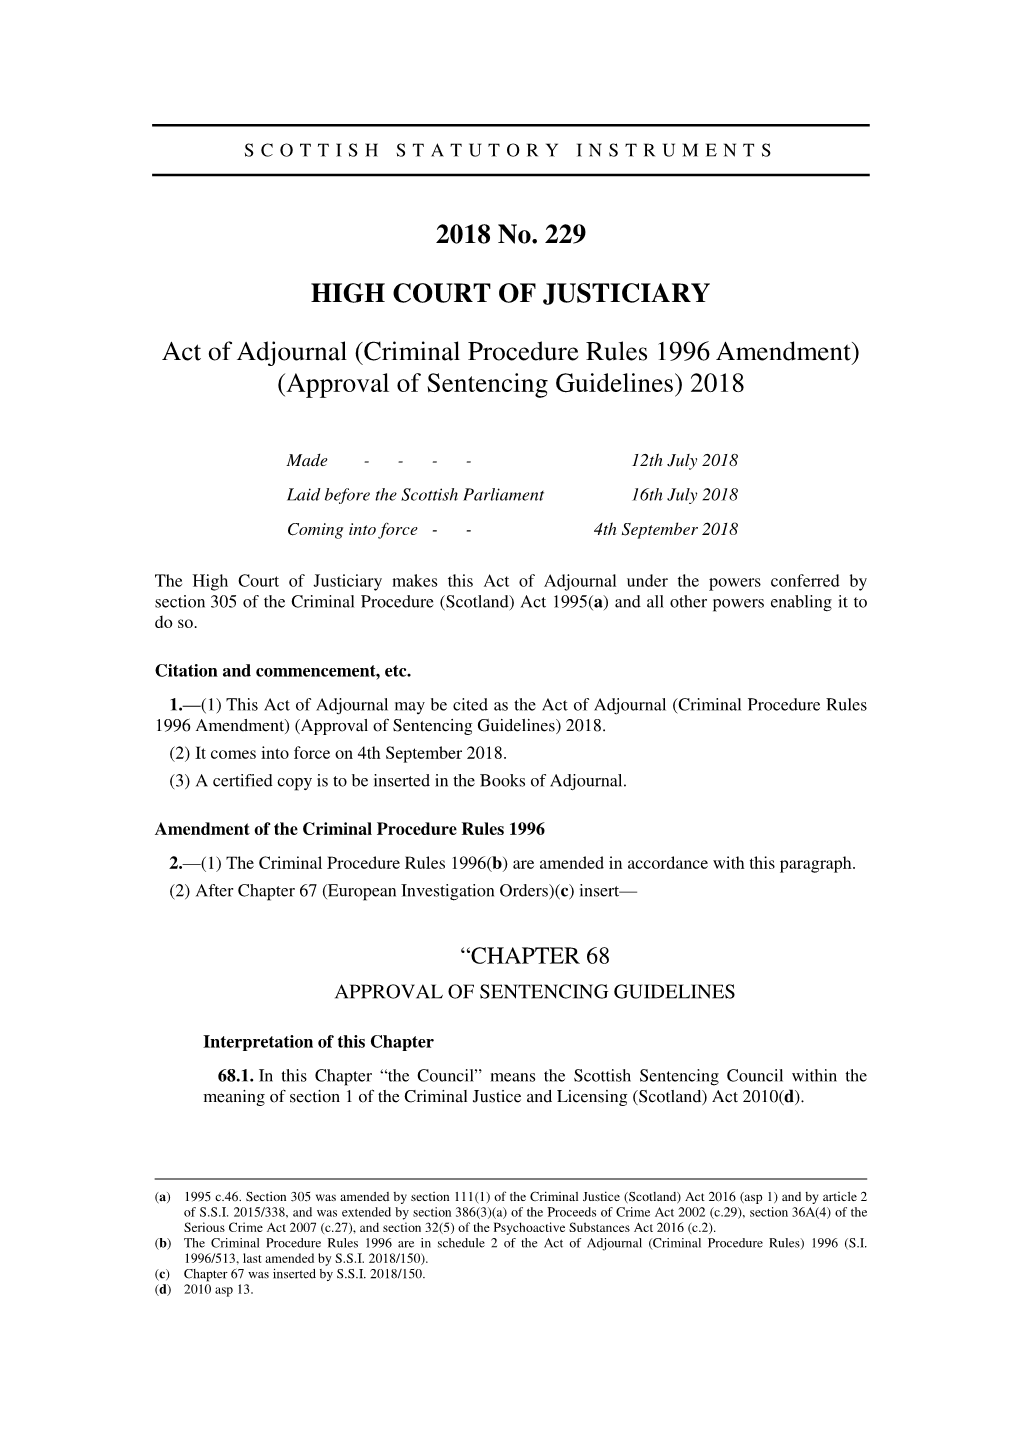 Act of Adjournal (Criminal Procedure Rules 1996 Amendment) (Approval of Sentencing Guidelines) 2018